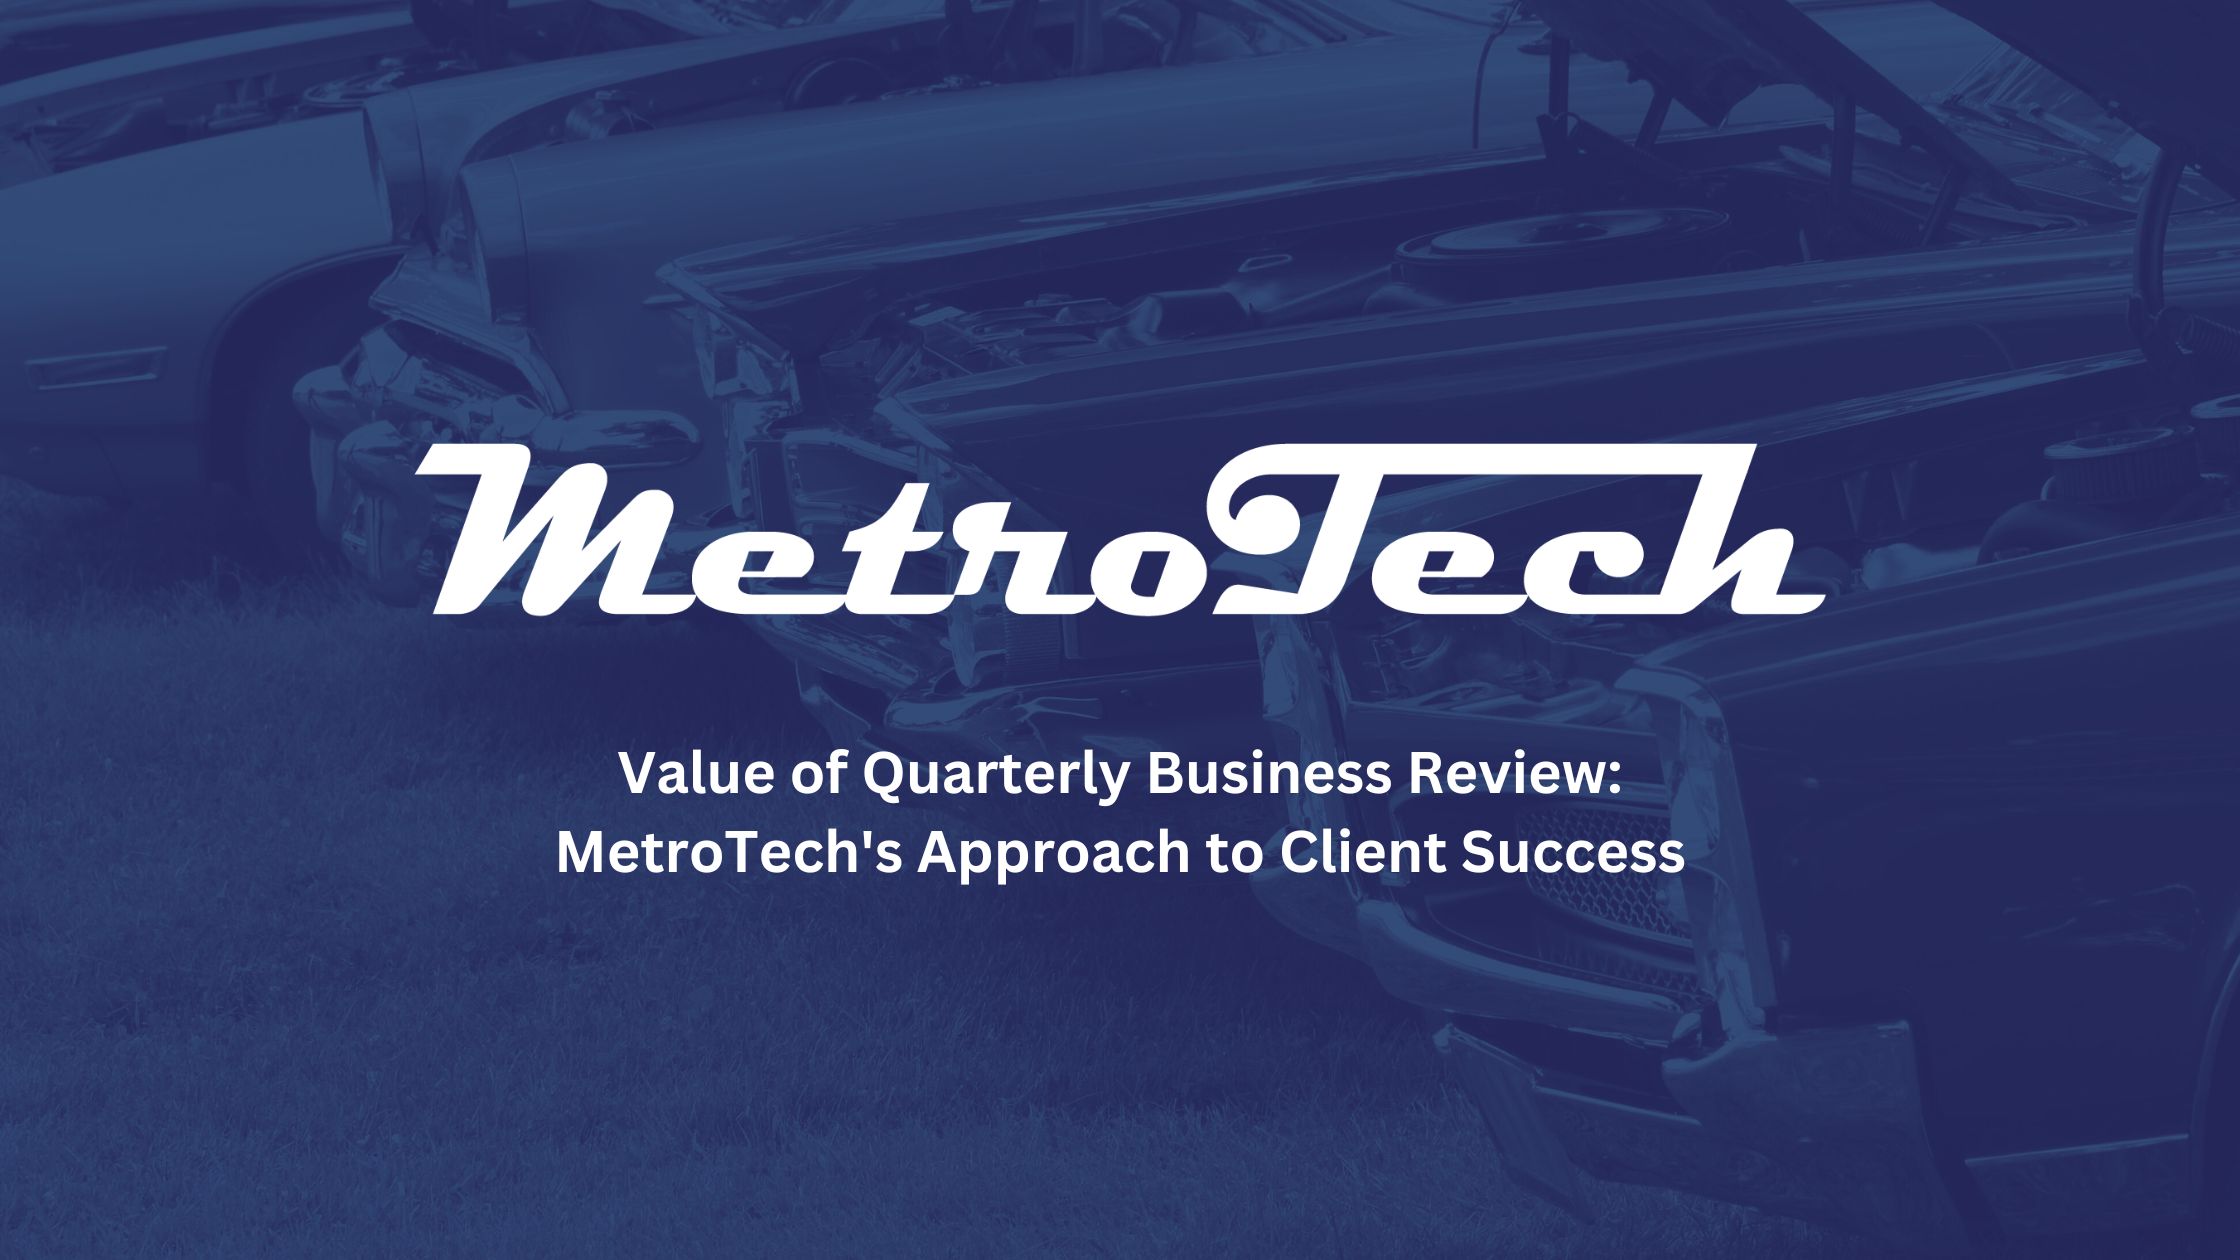 Value of Quarterly Business Review: MetroTech's Approach to Client Success